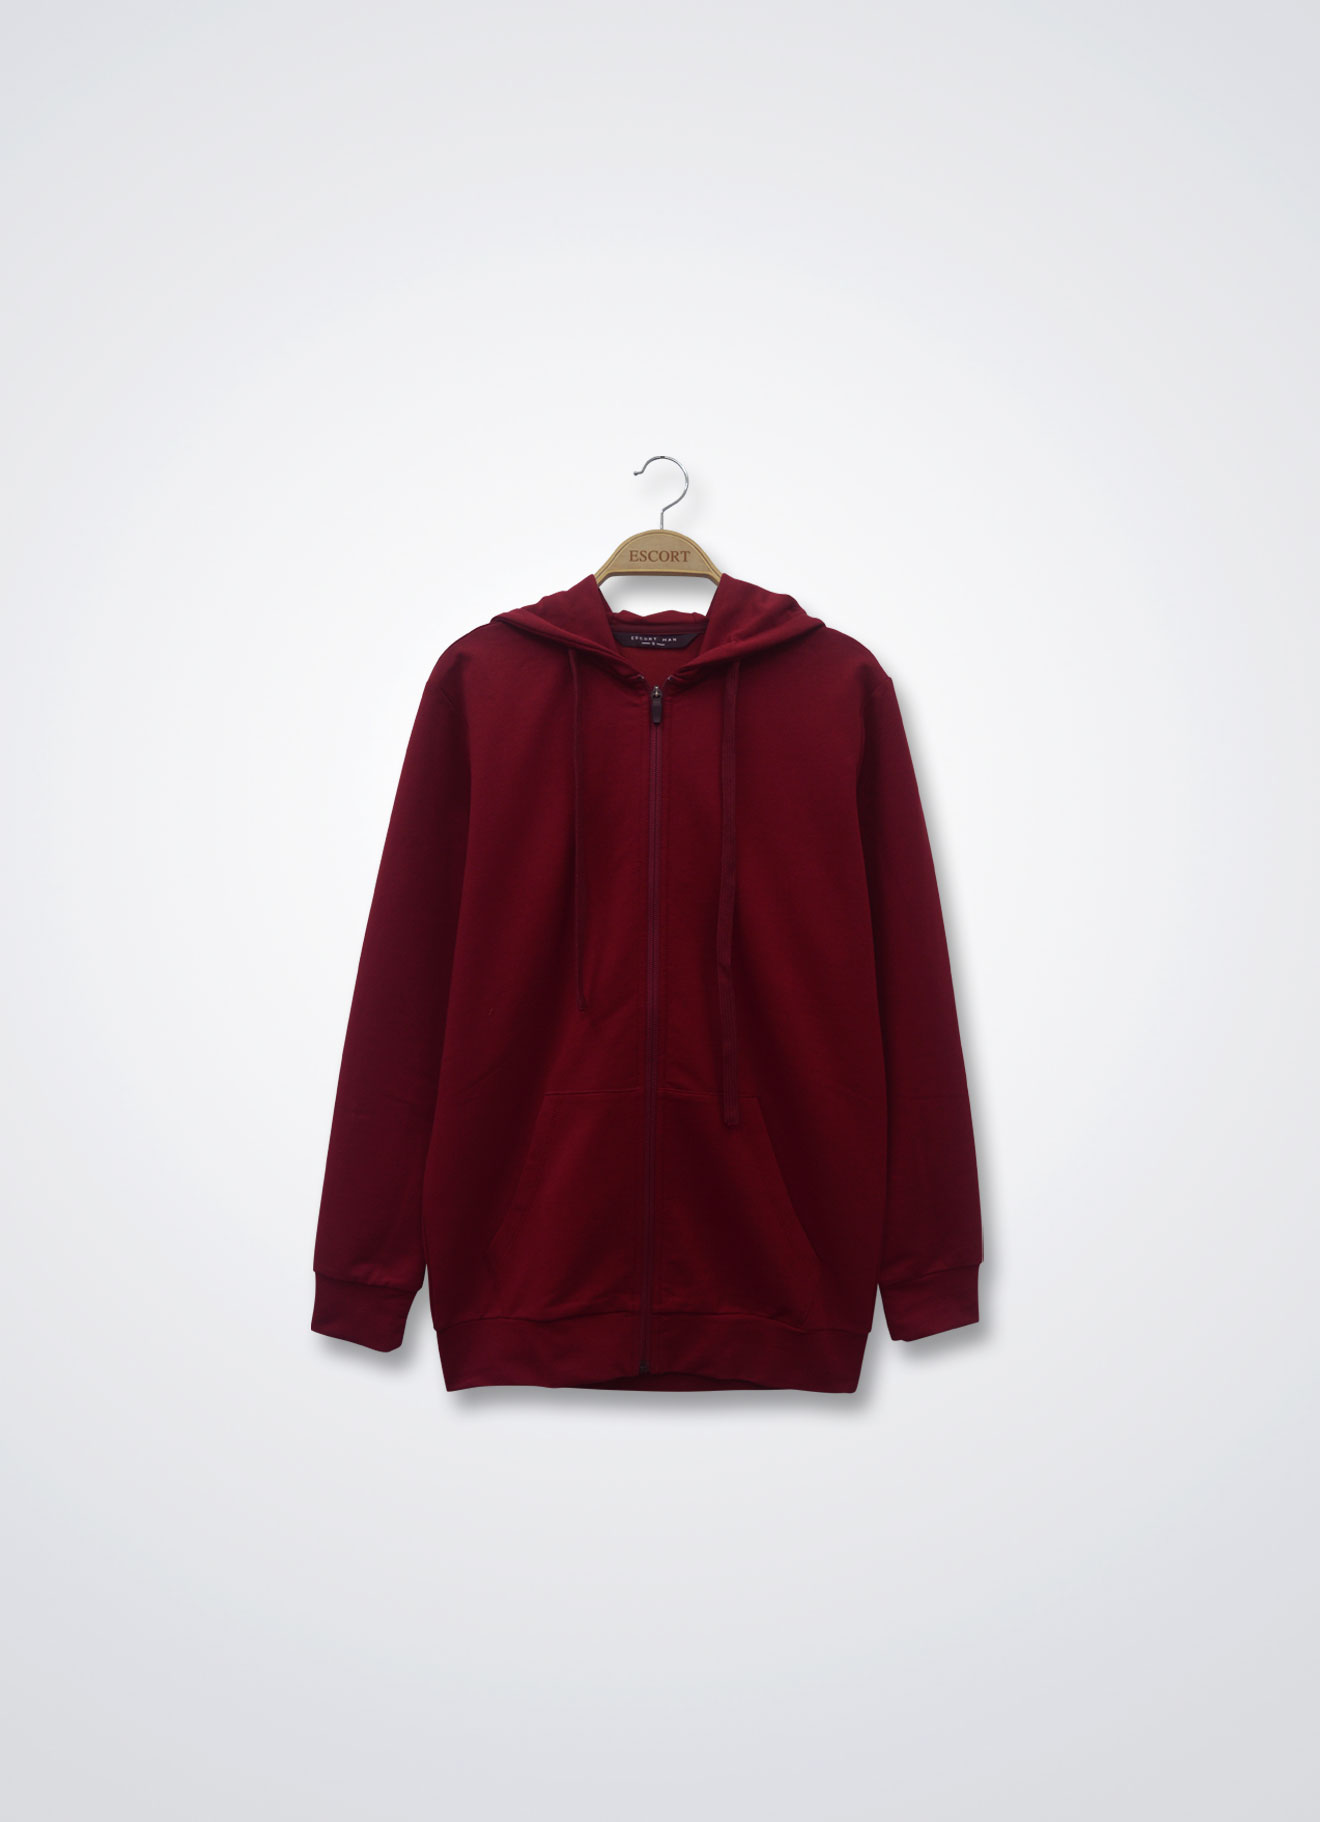 Brick-Red by Hooded Jacket